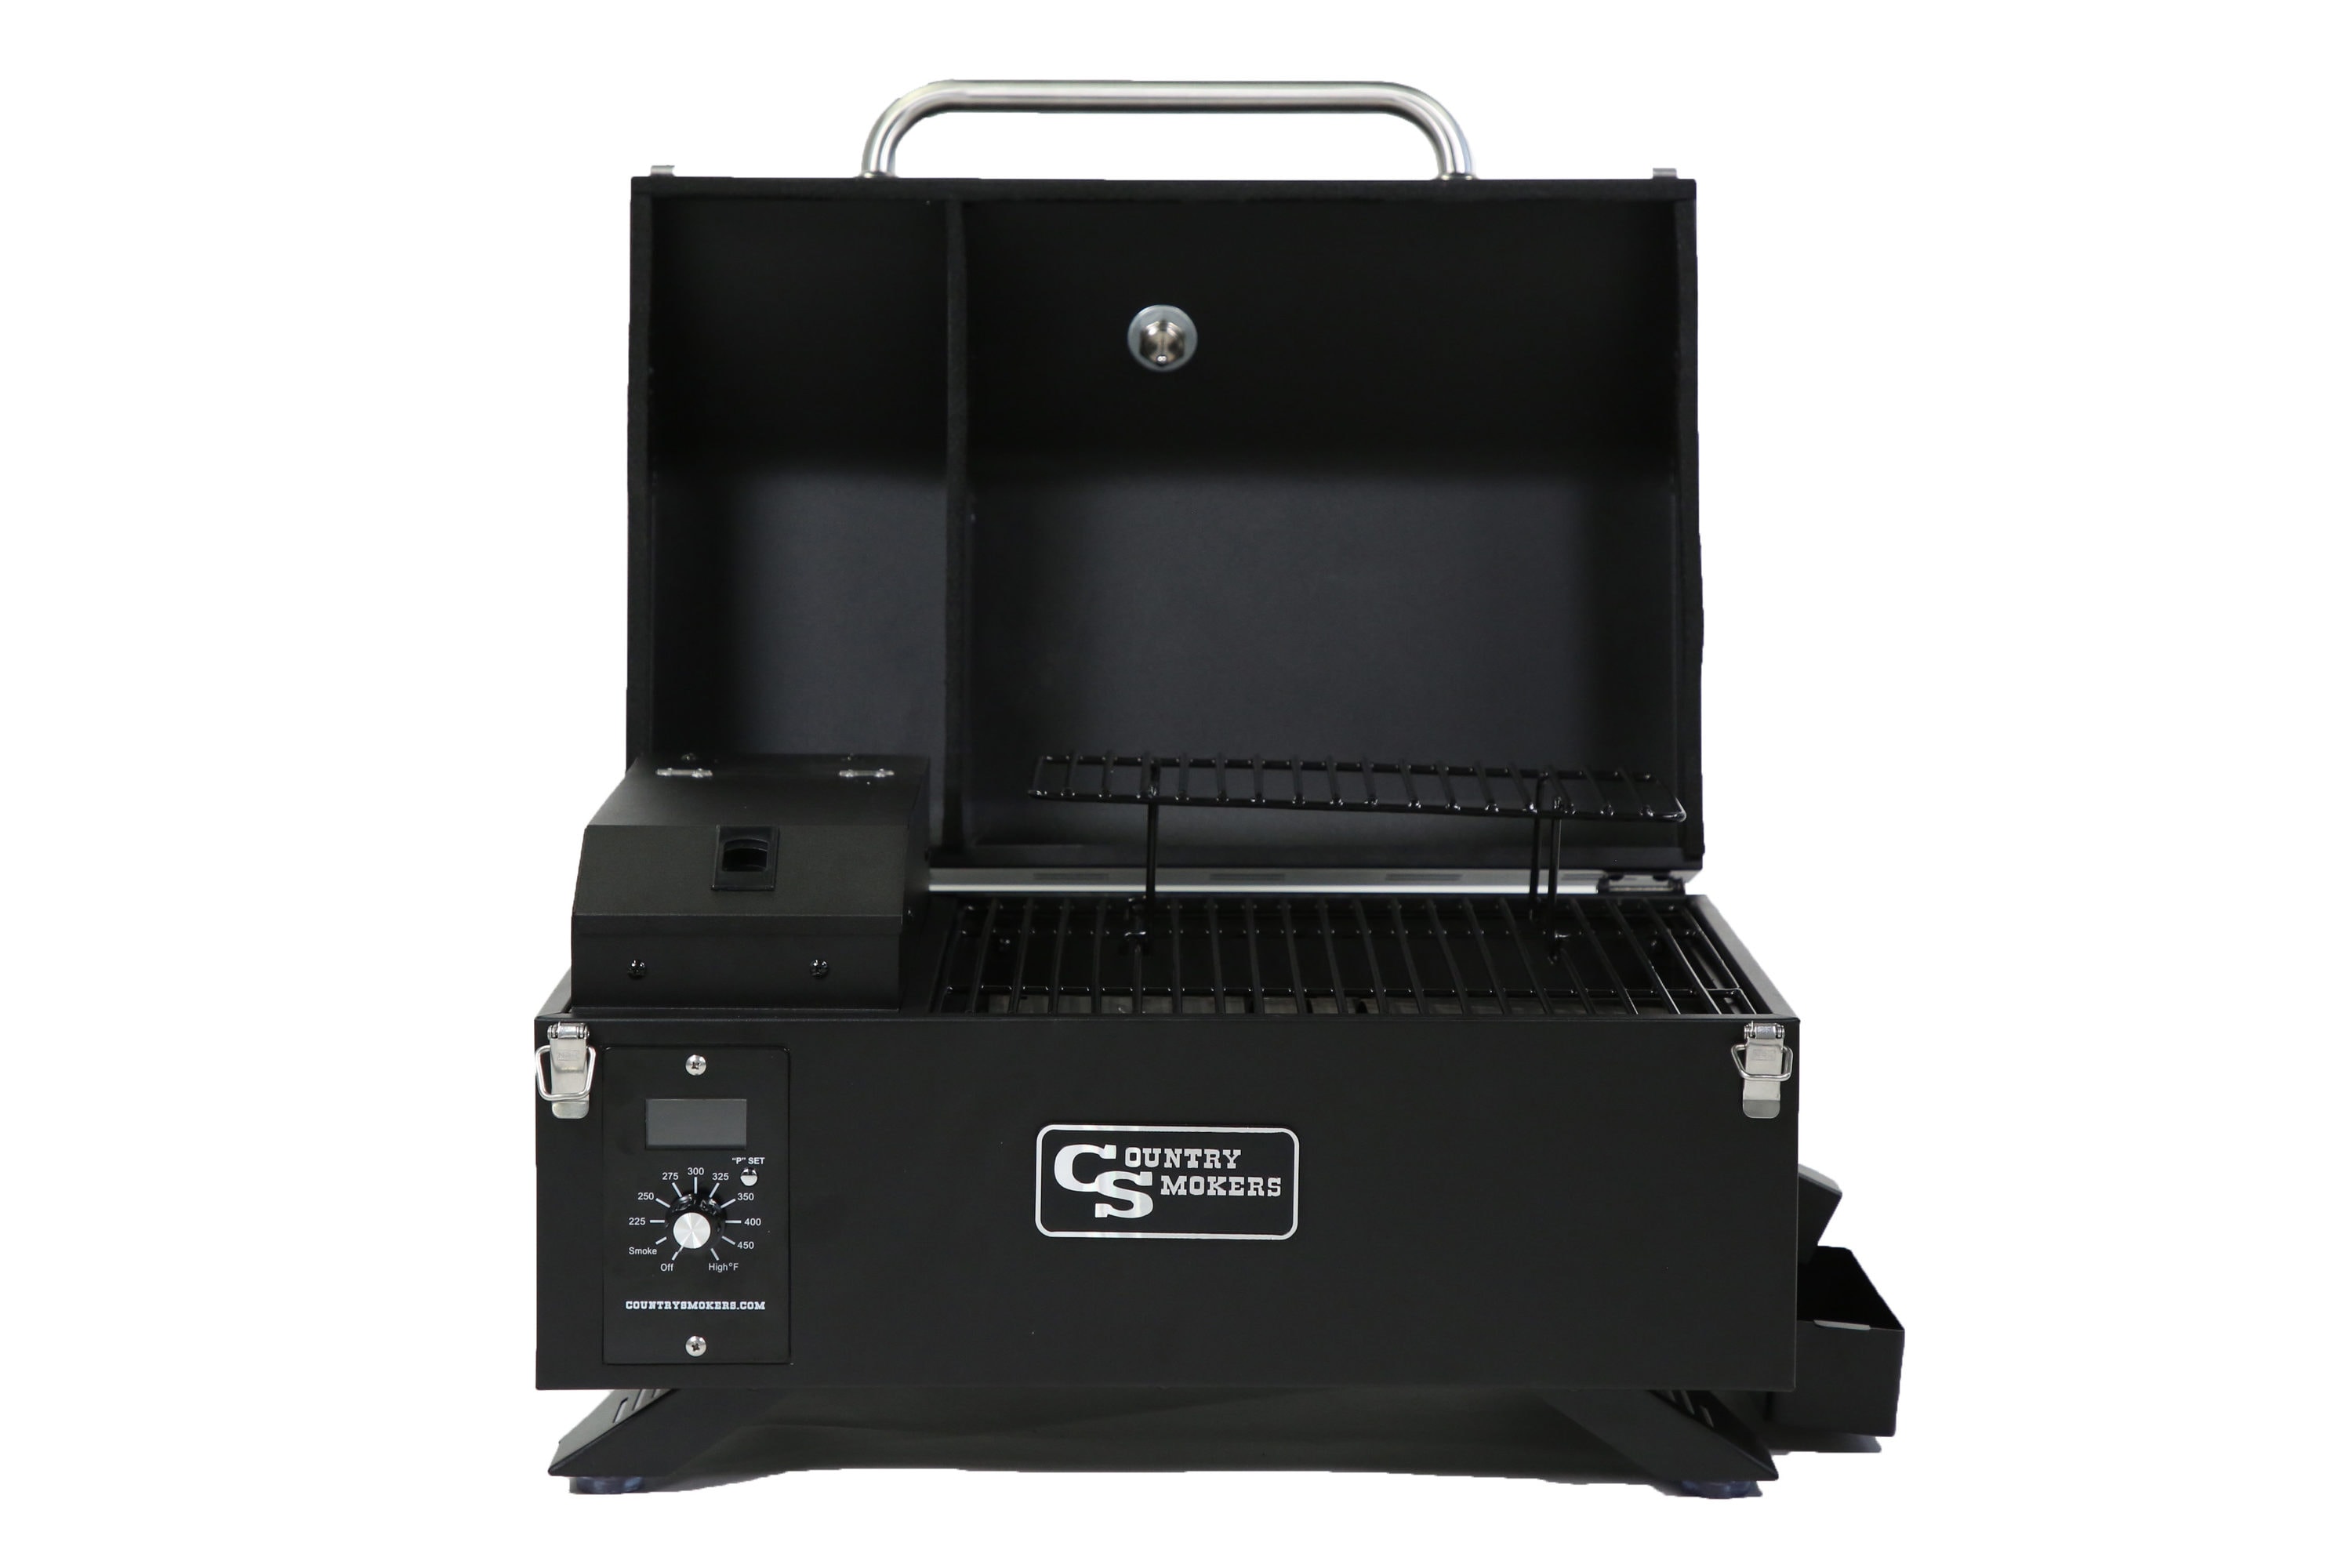 LG Black Label 300 Portable Pellet Grill *CLOSEOUT* - Country Homes Power